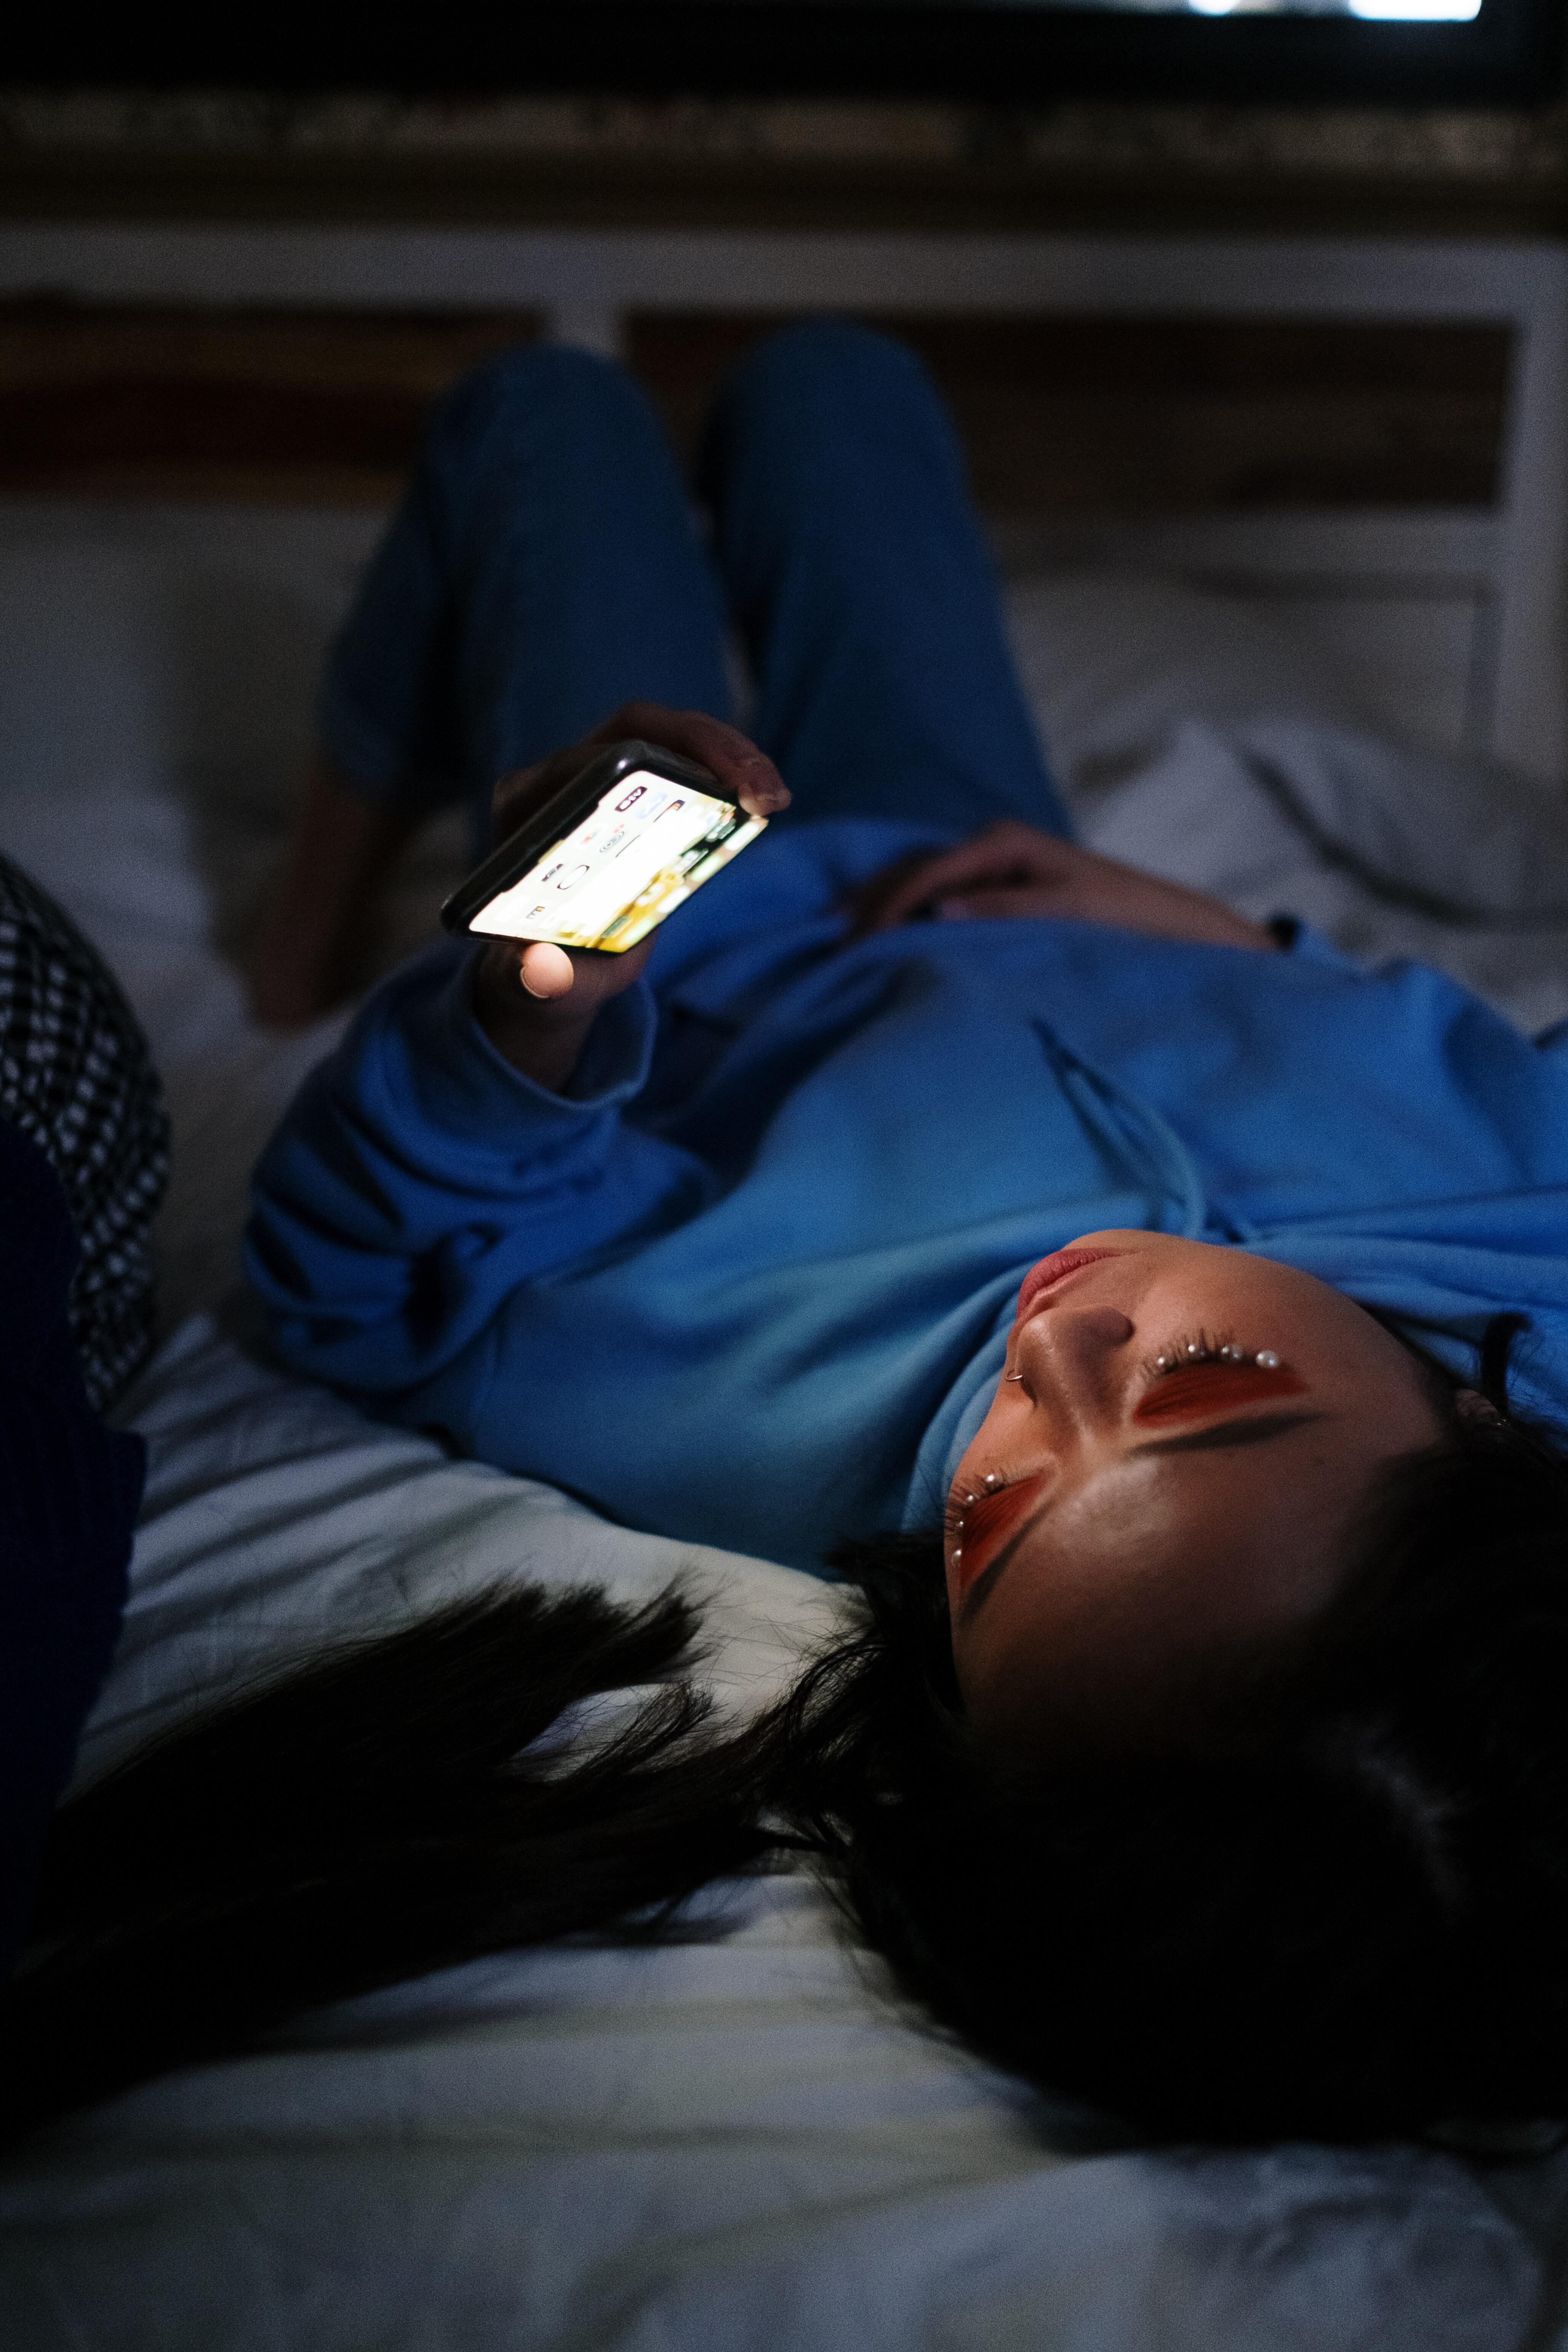 Study finds 40% of college students are addicted to their smartphone